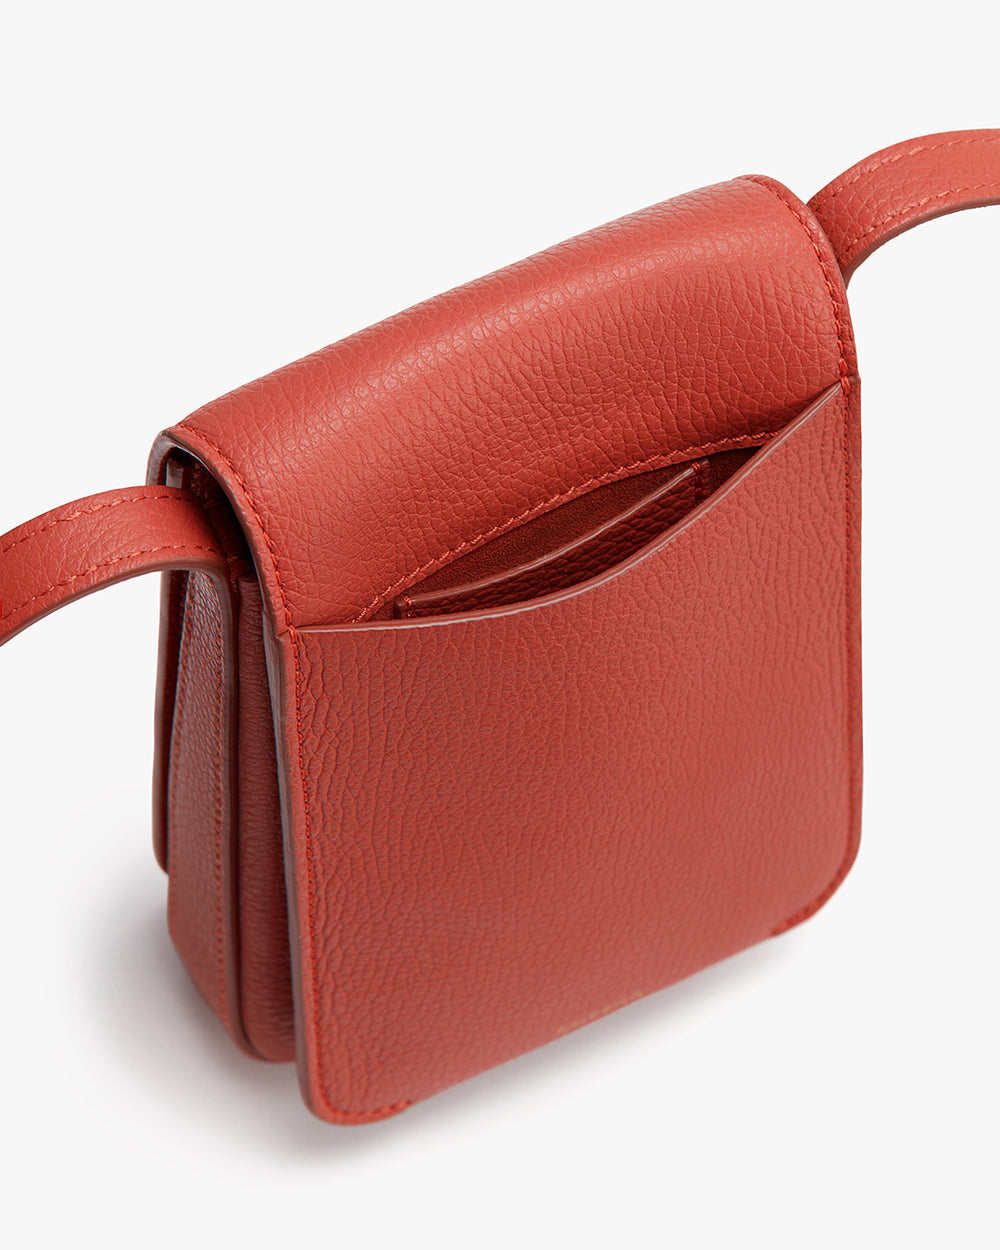 Small shoulder bag with flap closure and adjustable strap.